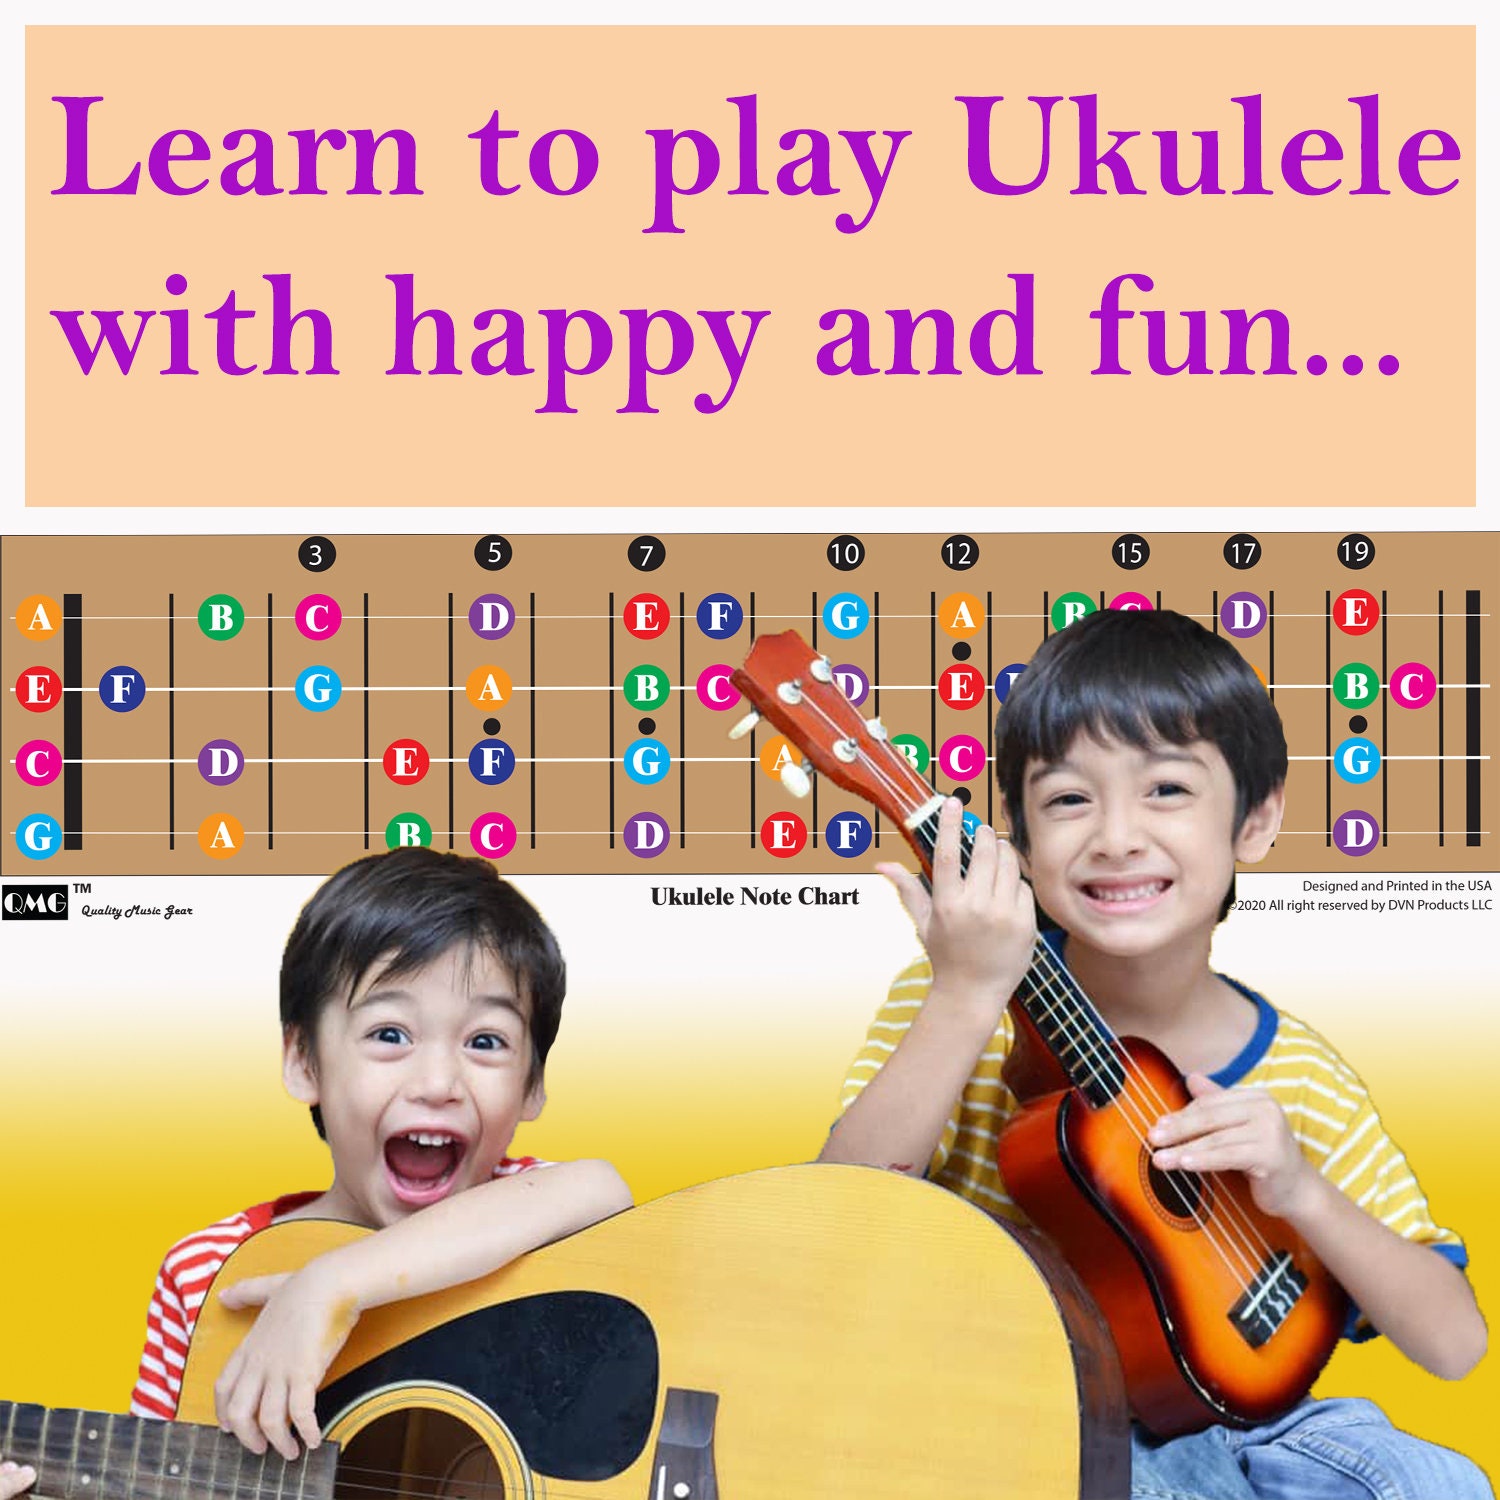 Pin on Learn to play the ukulele